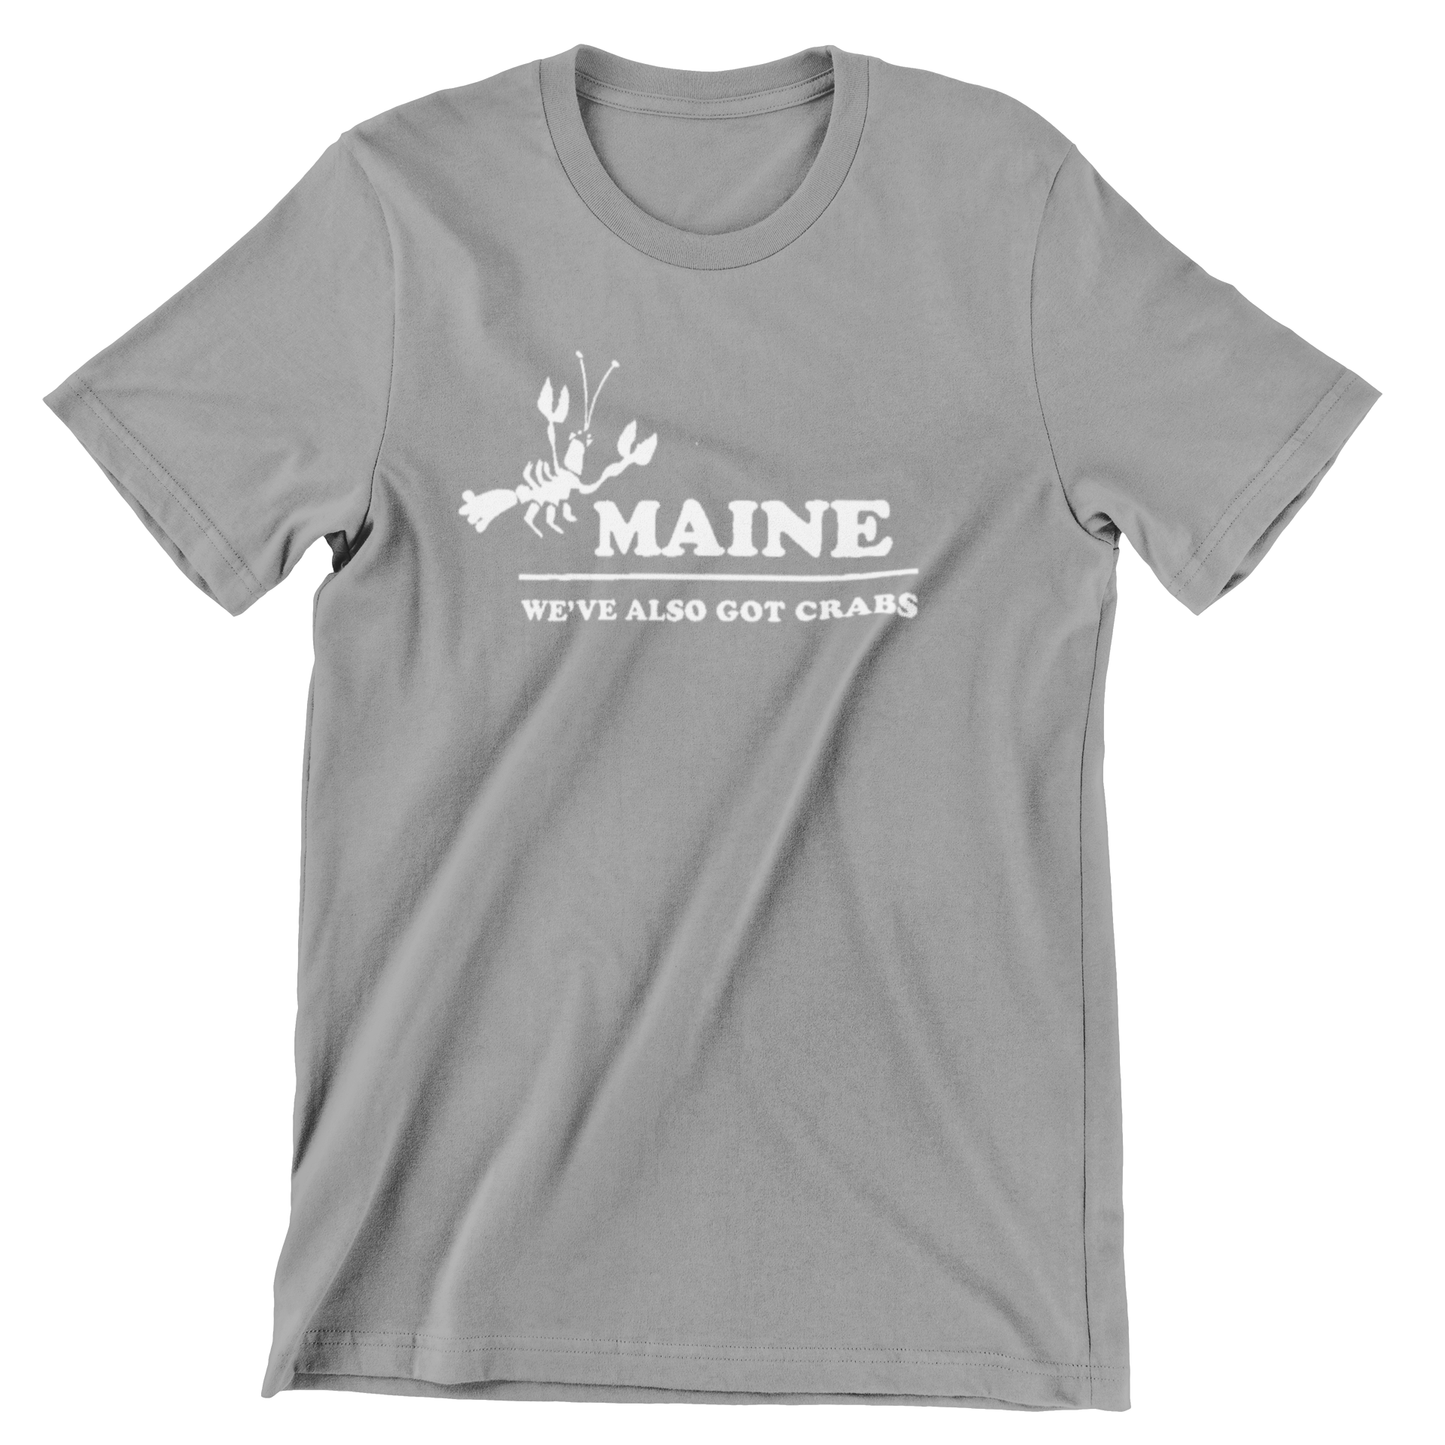 Maine Funny T Shirt We Have Crabs t shirts rockviewtees.com